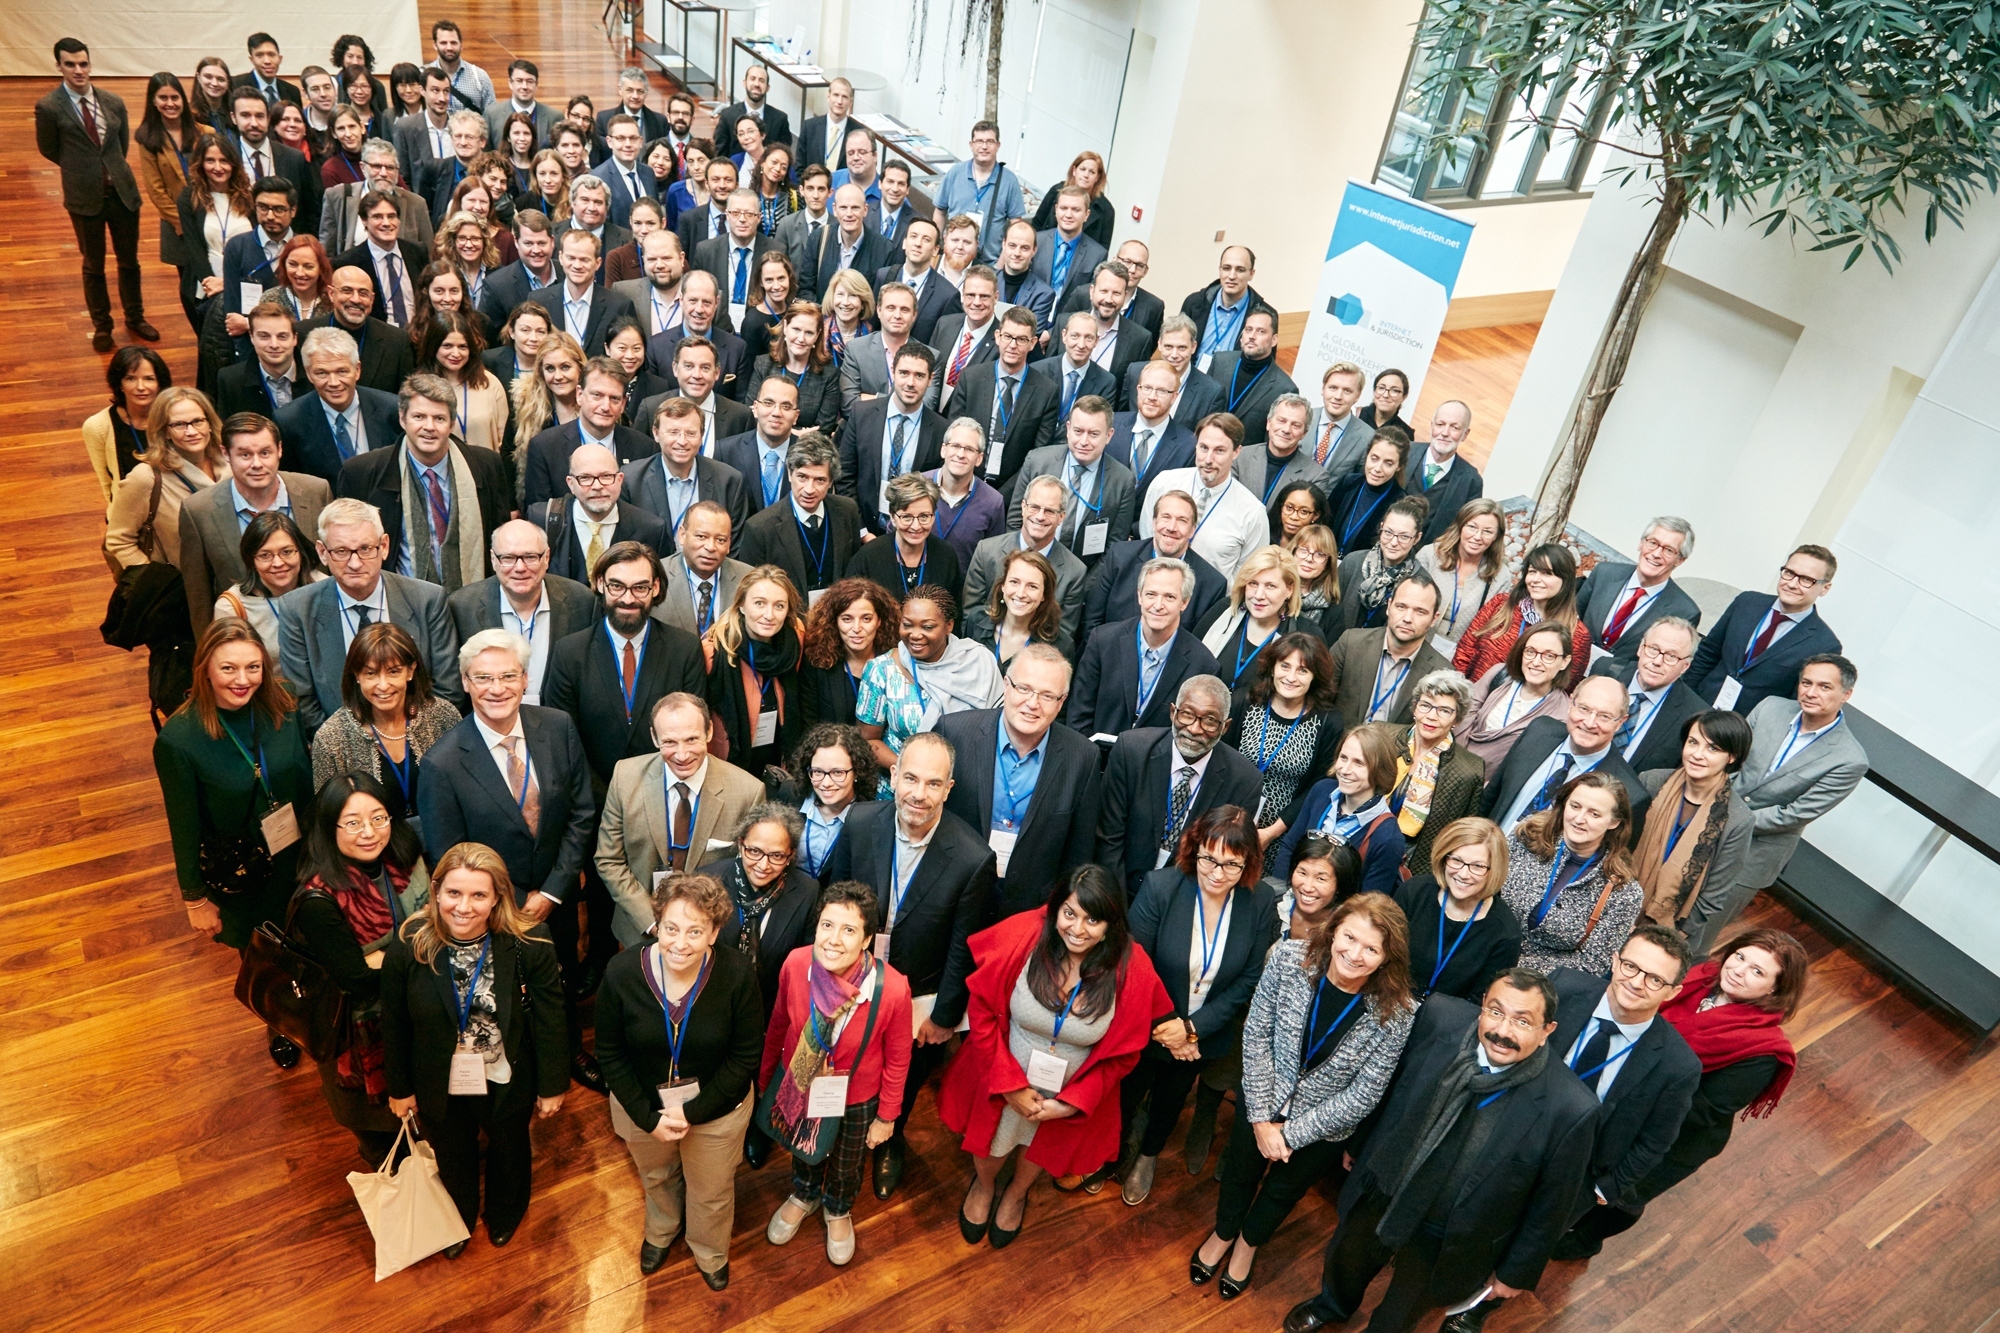 Internet Jurisdiction Multistakeholder Policy Network 2016 Group Photo